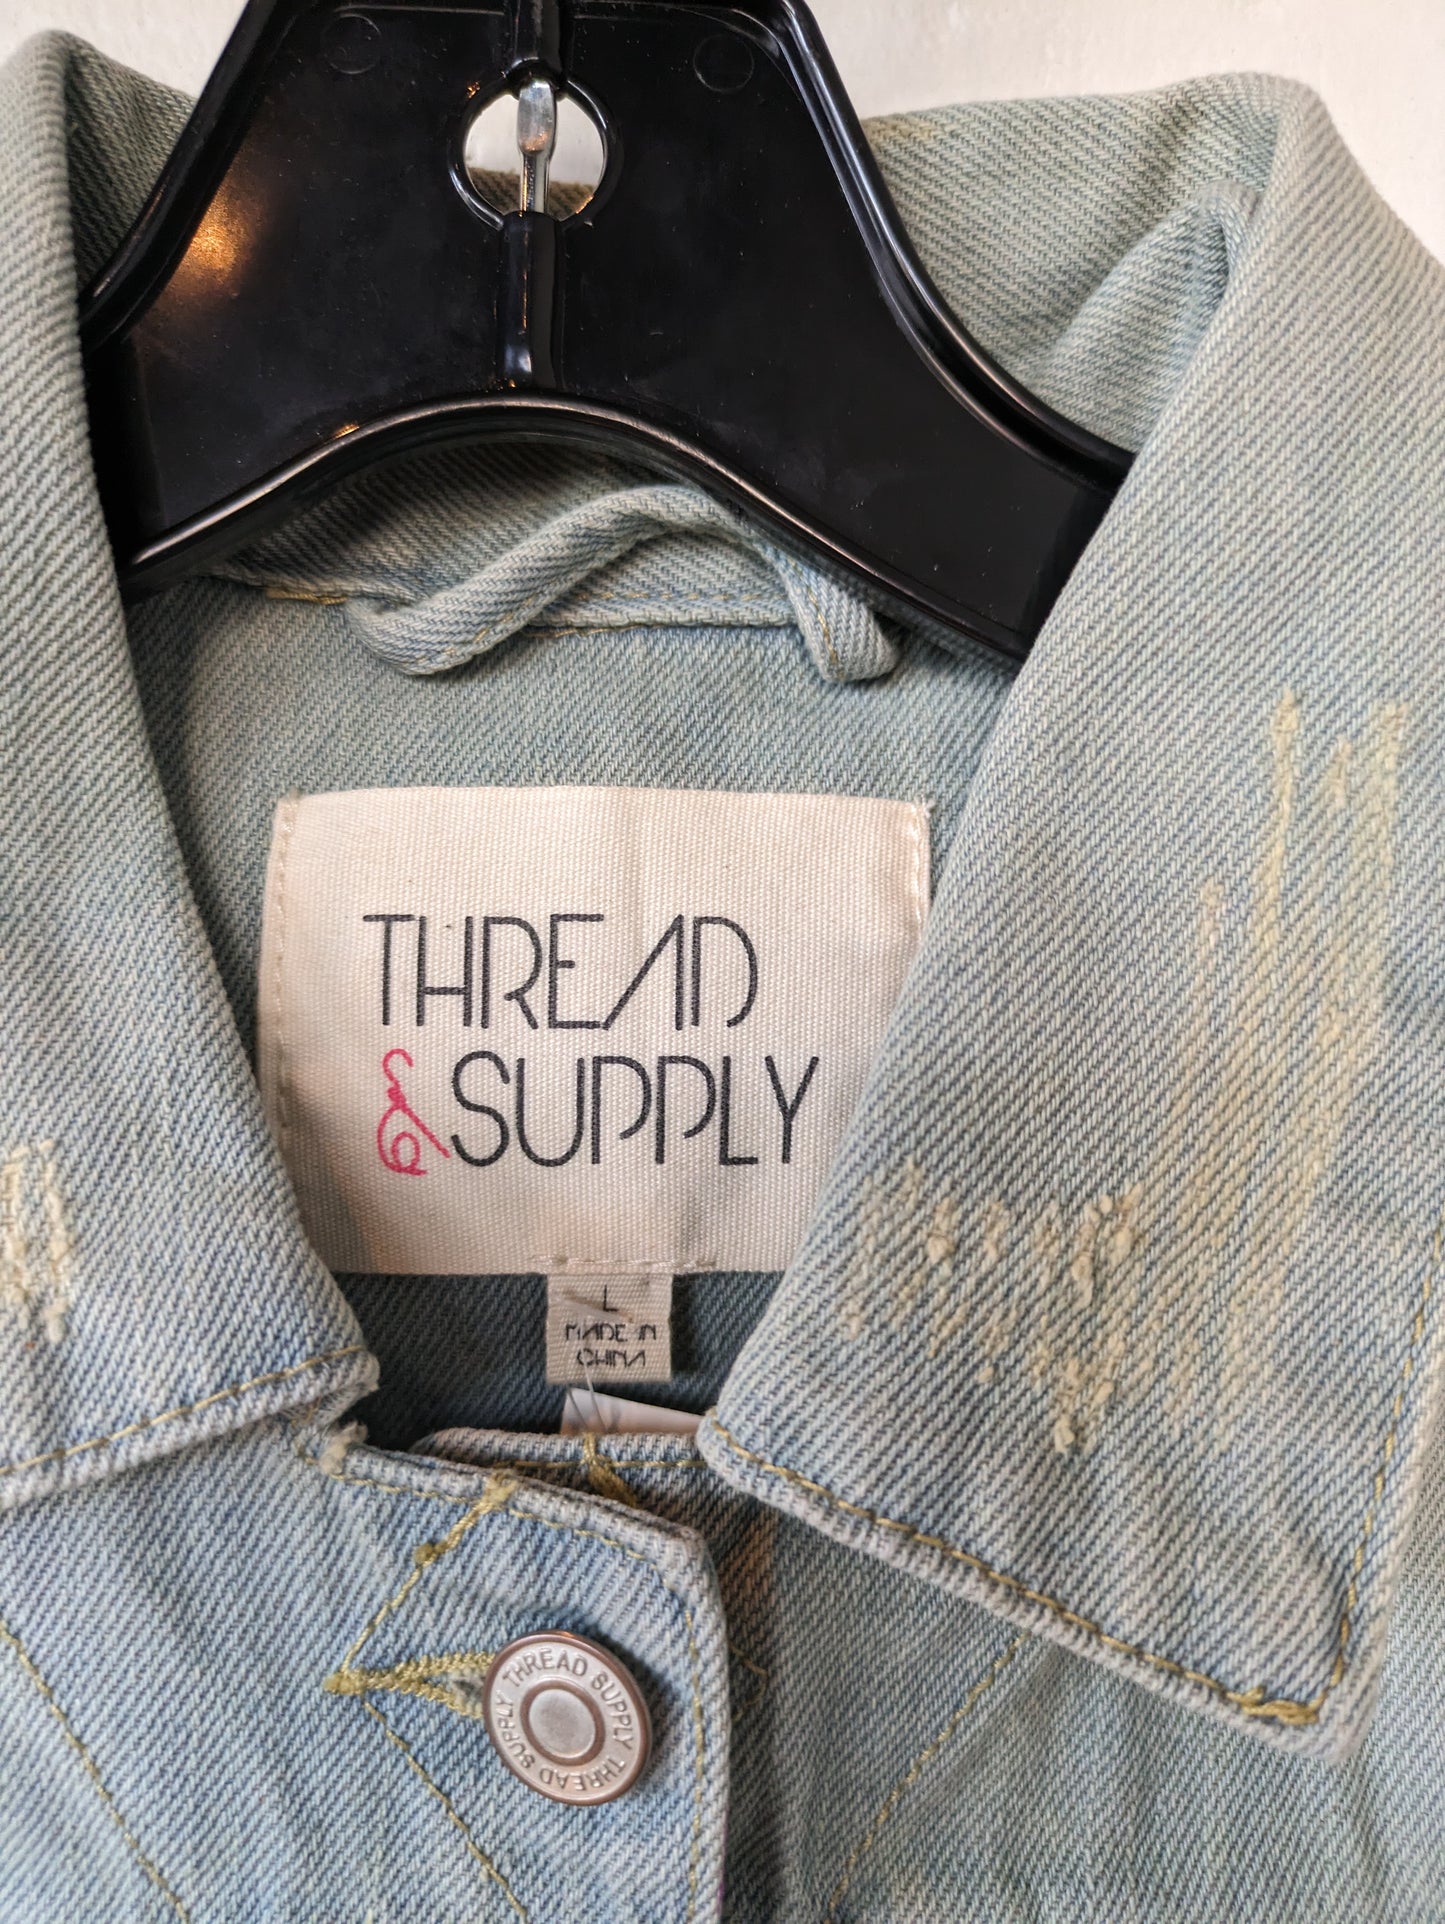 Jacket Denim By Thread And Supply  Size: L